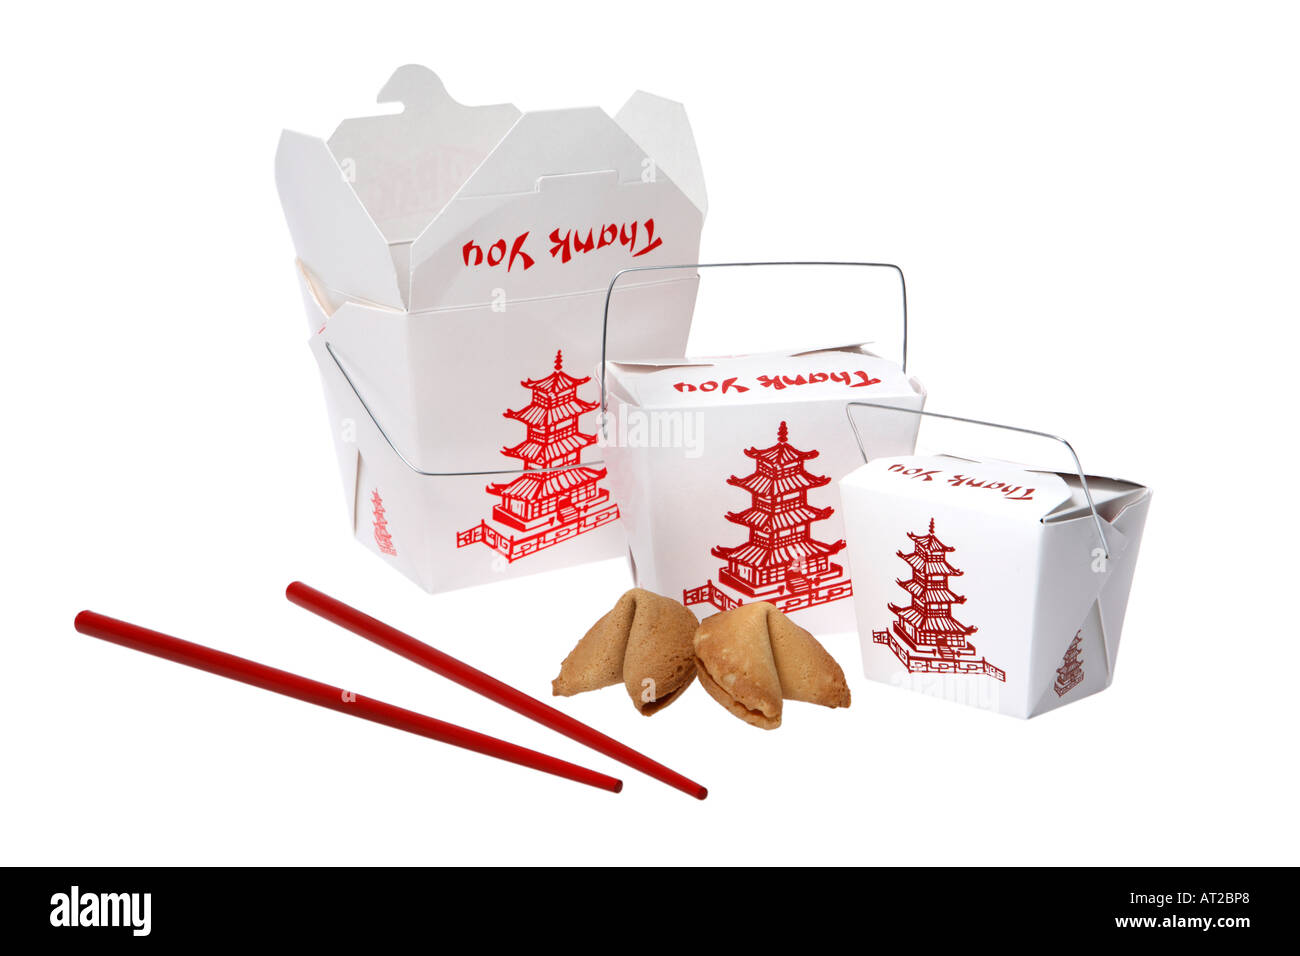 Takeout Boxes Chopsticks and Fortune Cookies Stock Photo